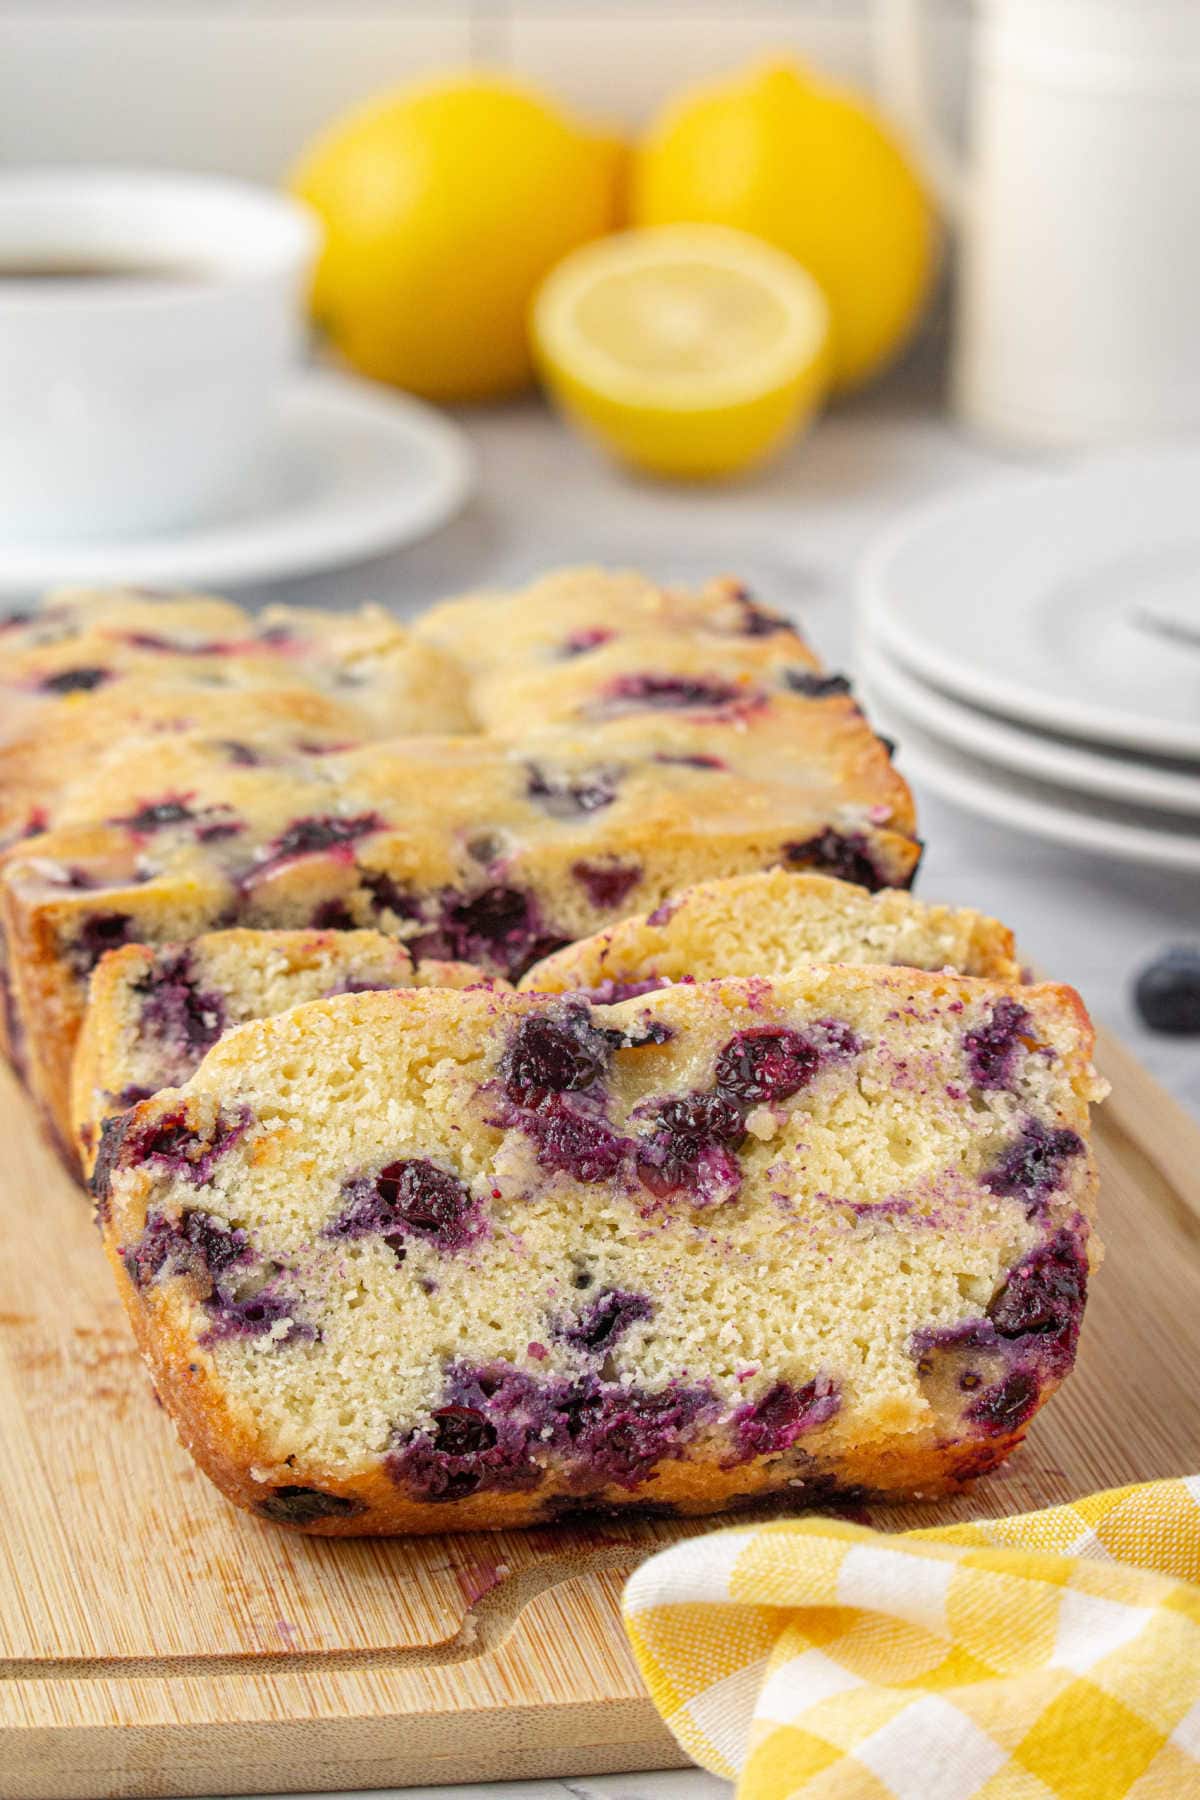 Slices of blueberry bread showing the moist, tender crumb and the juicy blueberries.